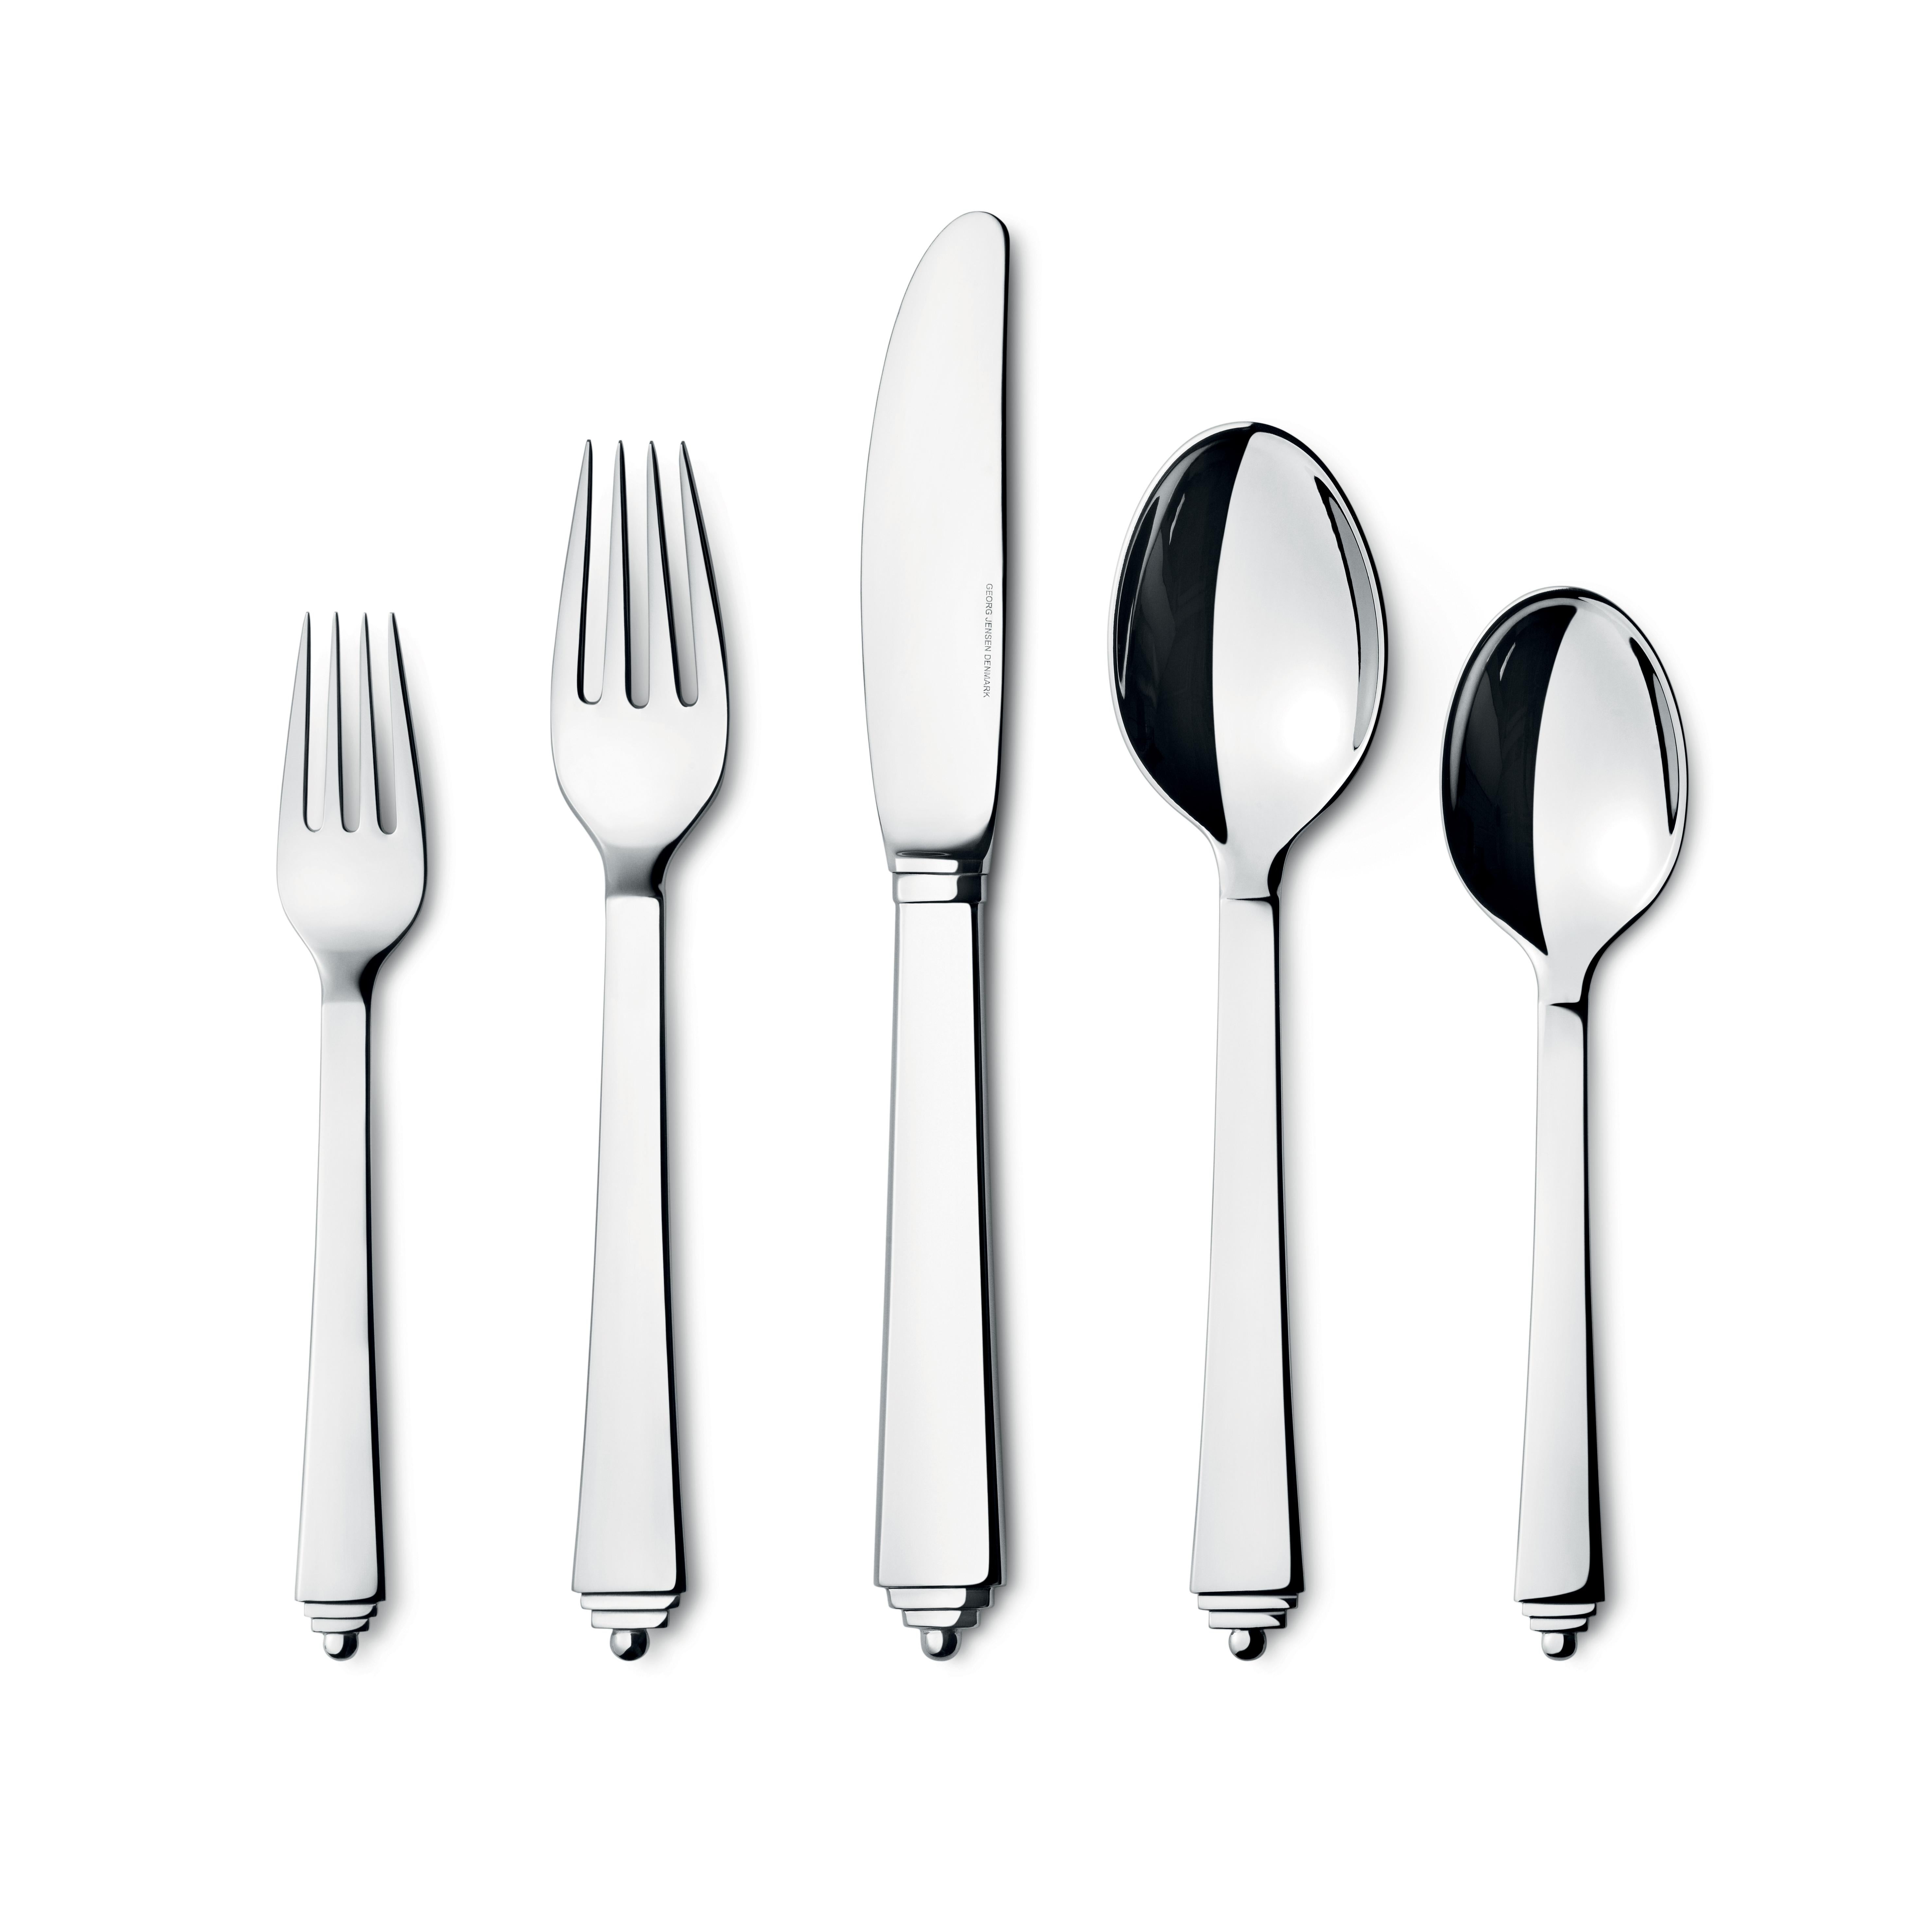 Giftbox with stainless steel luncheon fork, dinner fork, dinner knife, dinner spoon and dessert spoon.